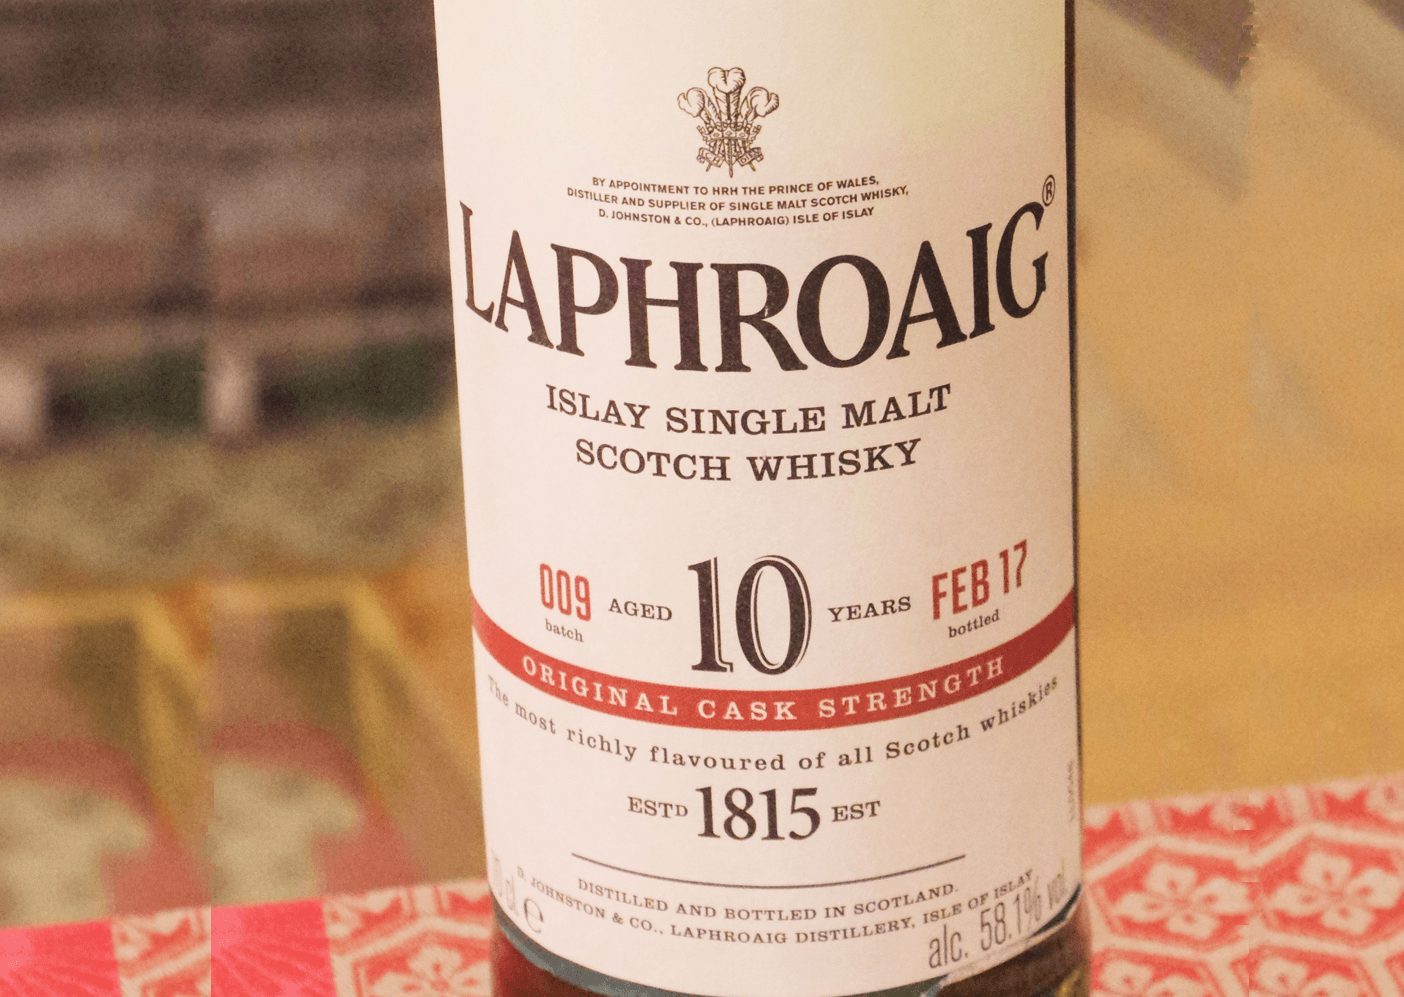 Laphroaig 10 years old, cask strength, batch 009: a special release in 2017